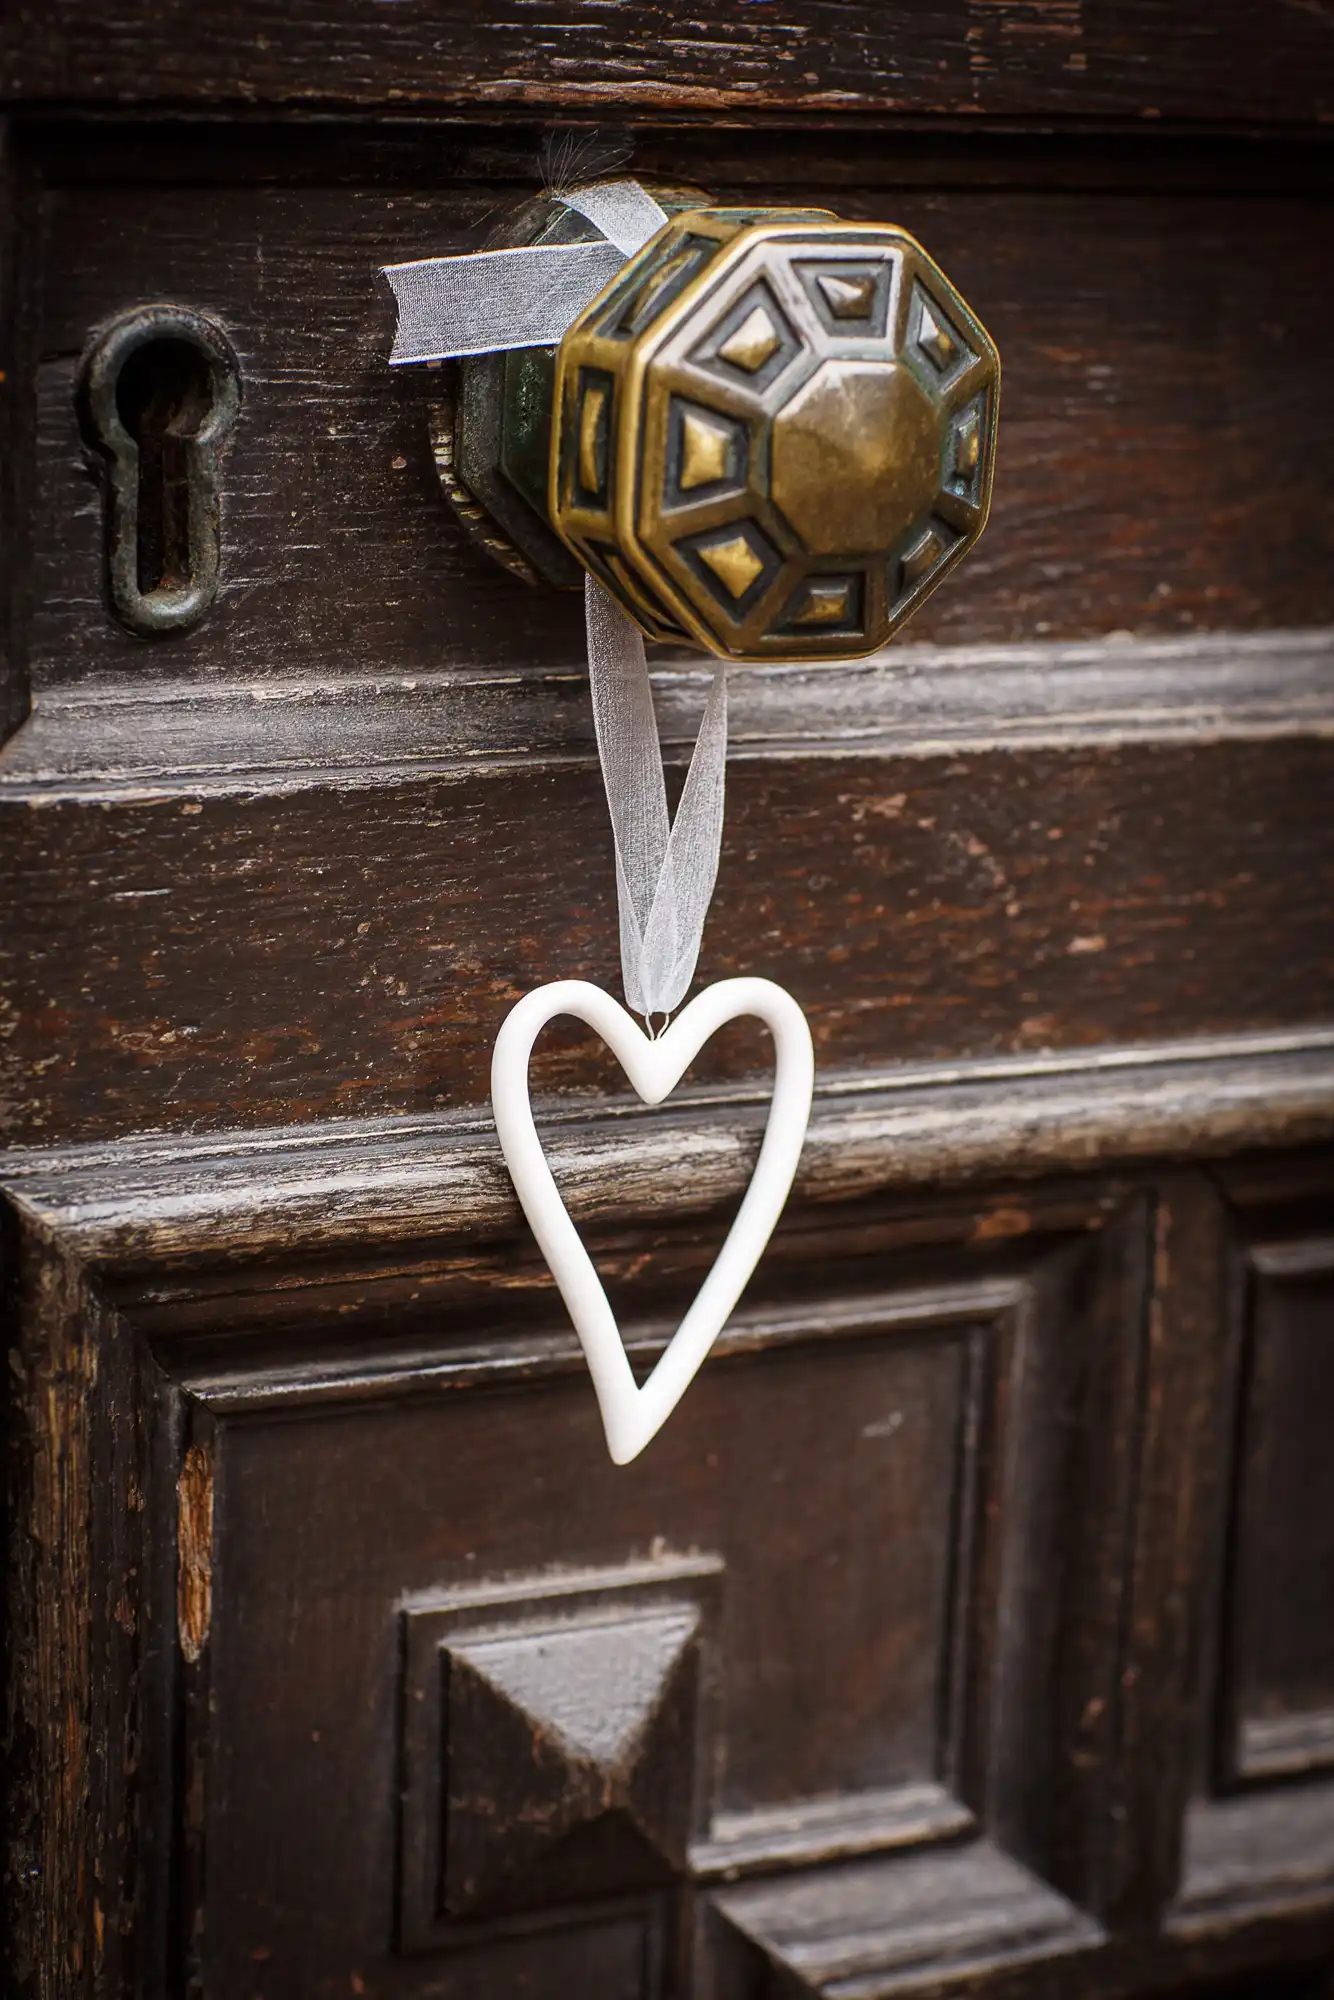 A white heart-shaped decoration hangs on a ribbon from an ornate brass door knob on an aged wooden door.